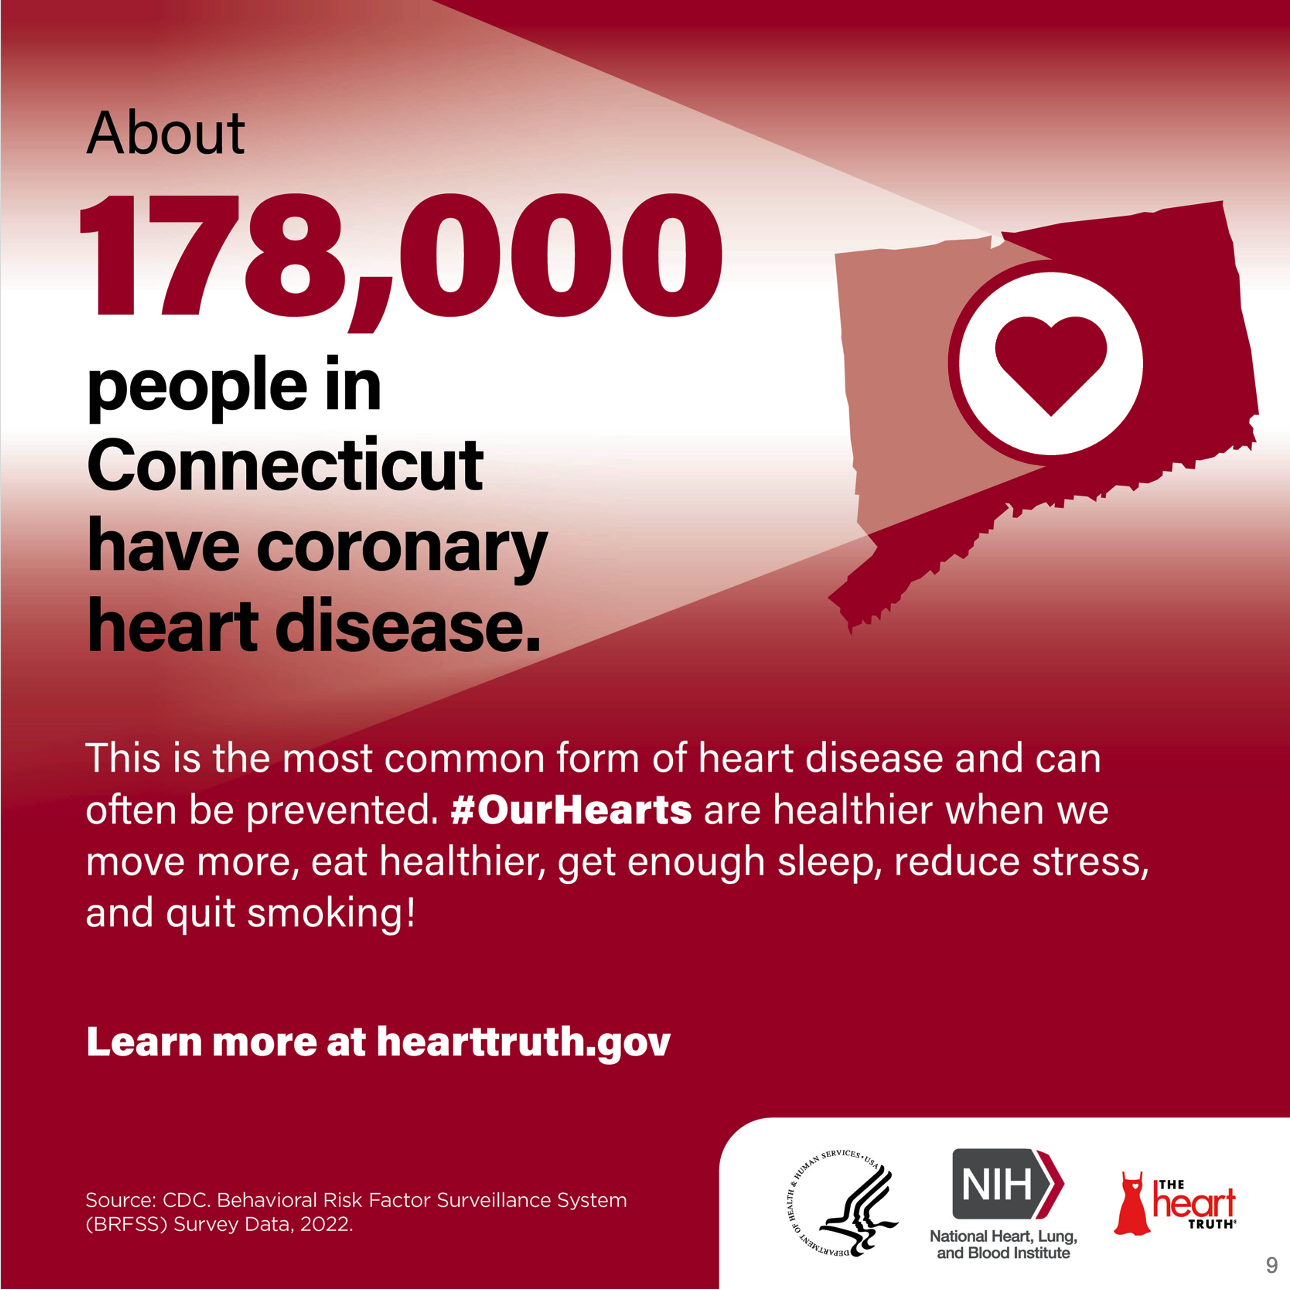 About 178,000 people in CT have coronary heart disease. this is the most common form of heart disease and can often be prevented.